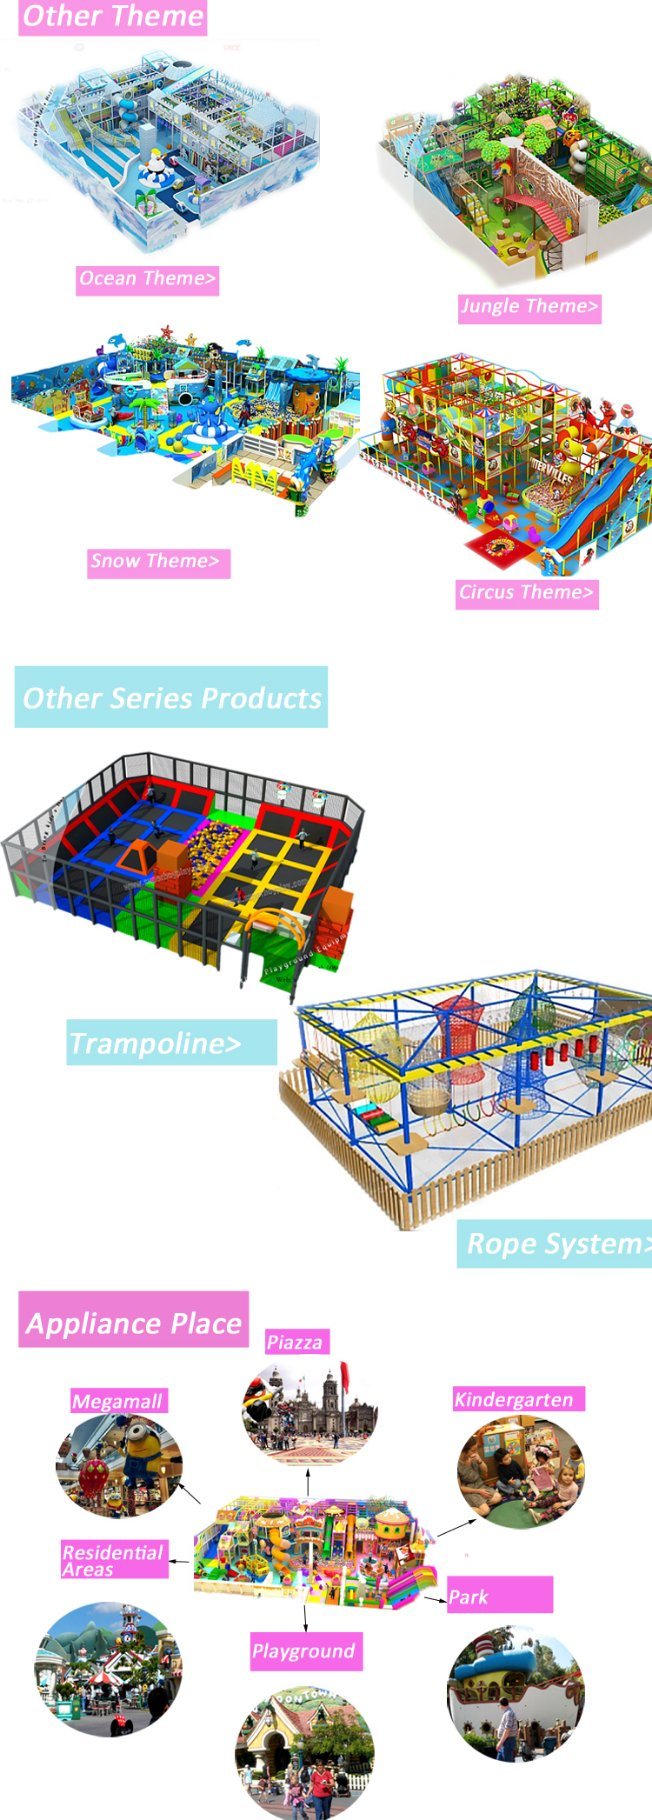 New Design Forest Themed Indoor Playground Equipment with Driving School